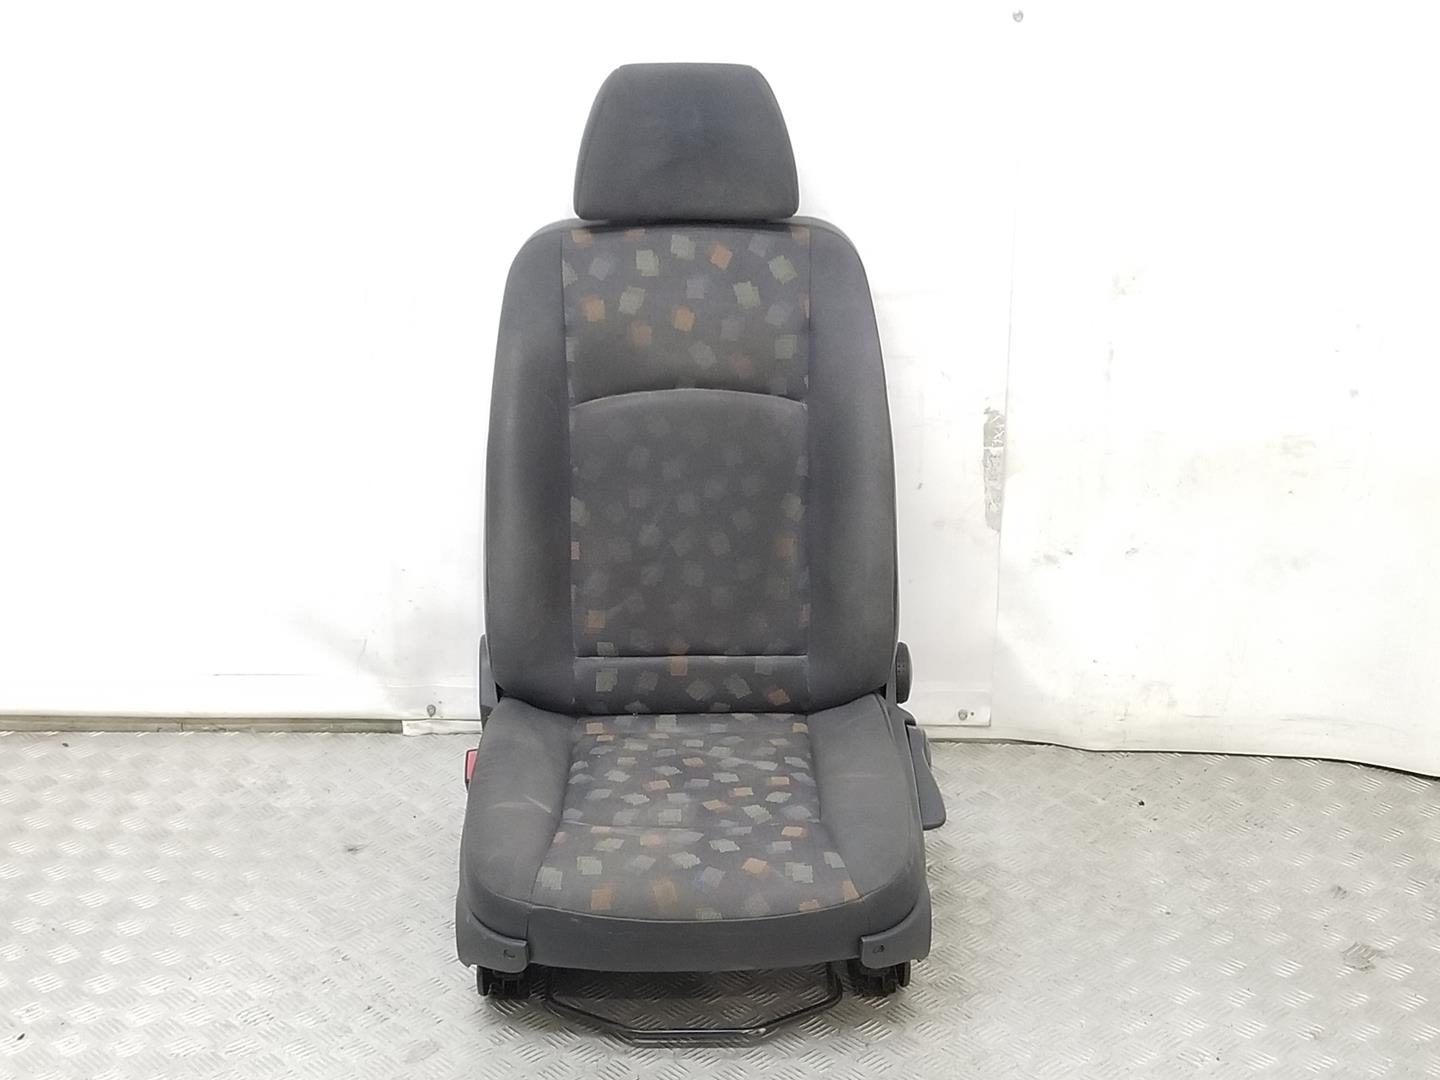 MERCEDES-BENZ Vito W639 (2003-2015) Front Left Seat ASIENTOTELA, ASIENTOCONDUCTOR 19774775